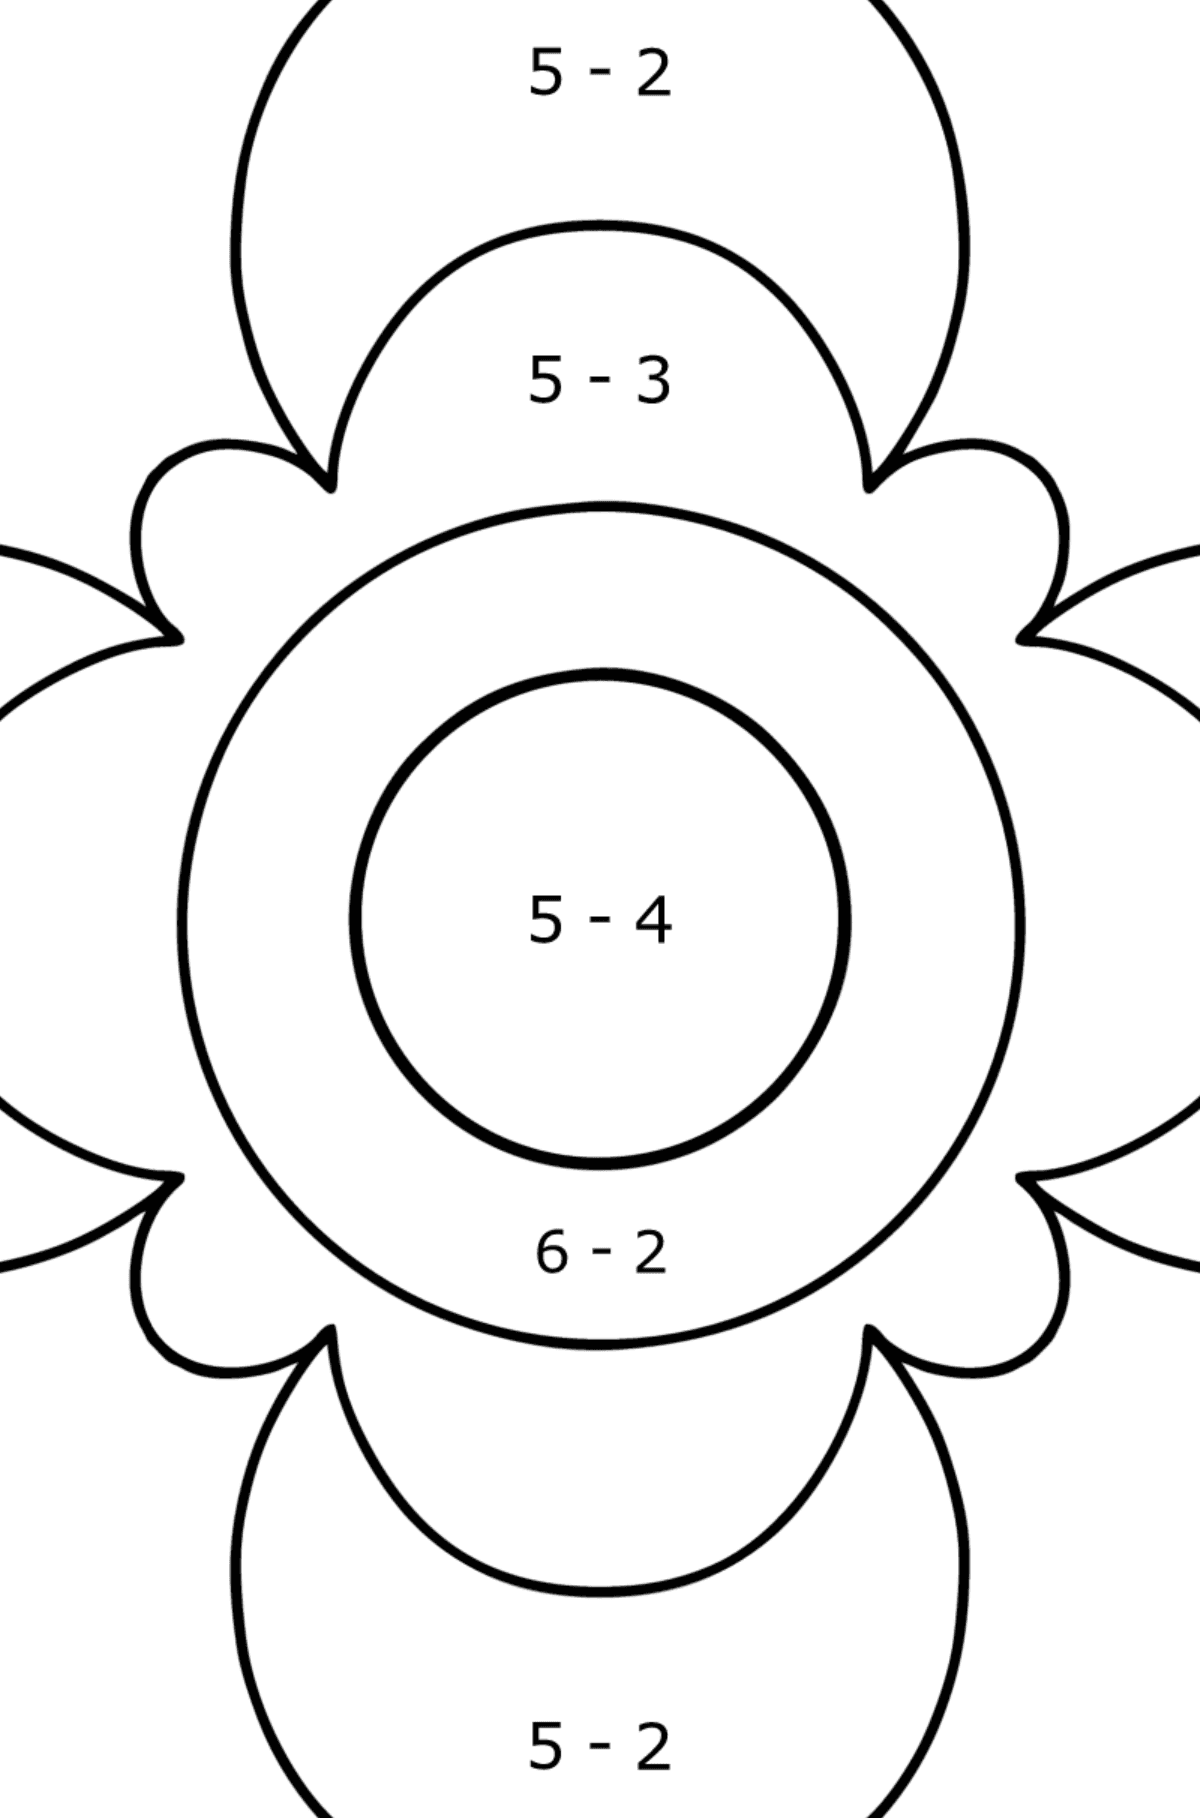 Coloring Anti stress flower for kids - Math Coloring - Subtraction for Kids